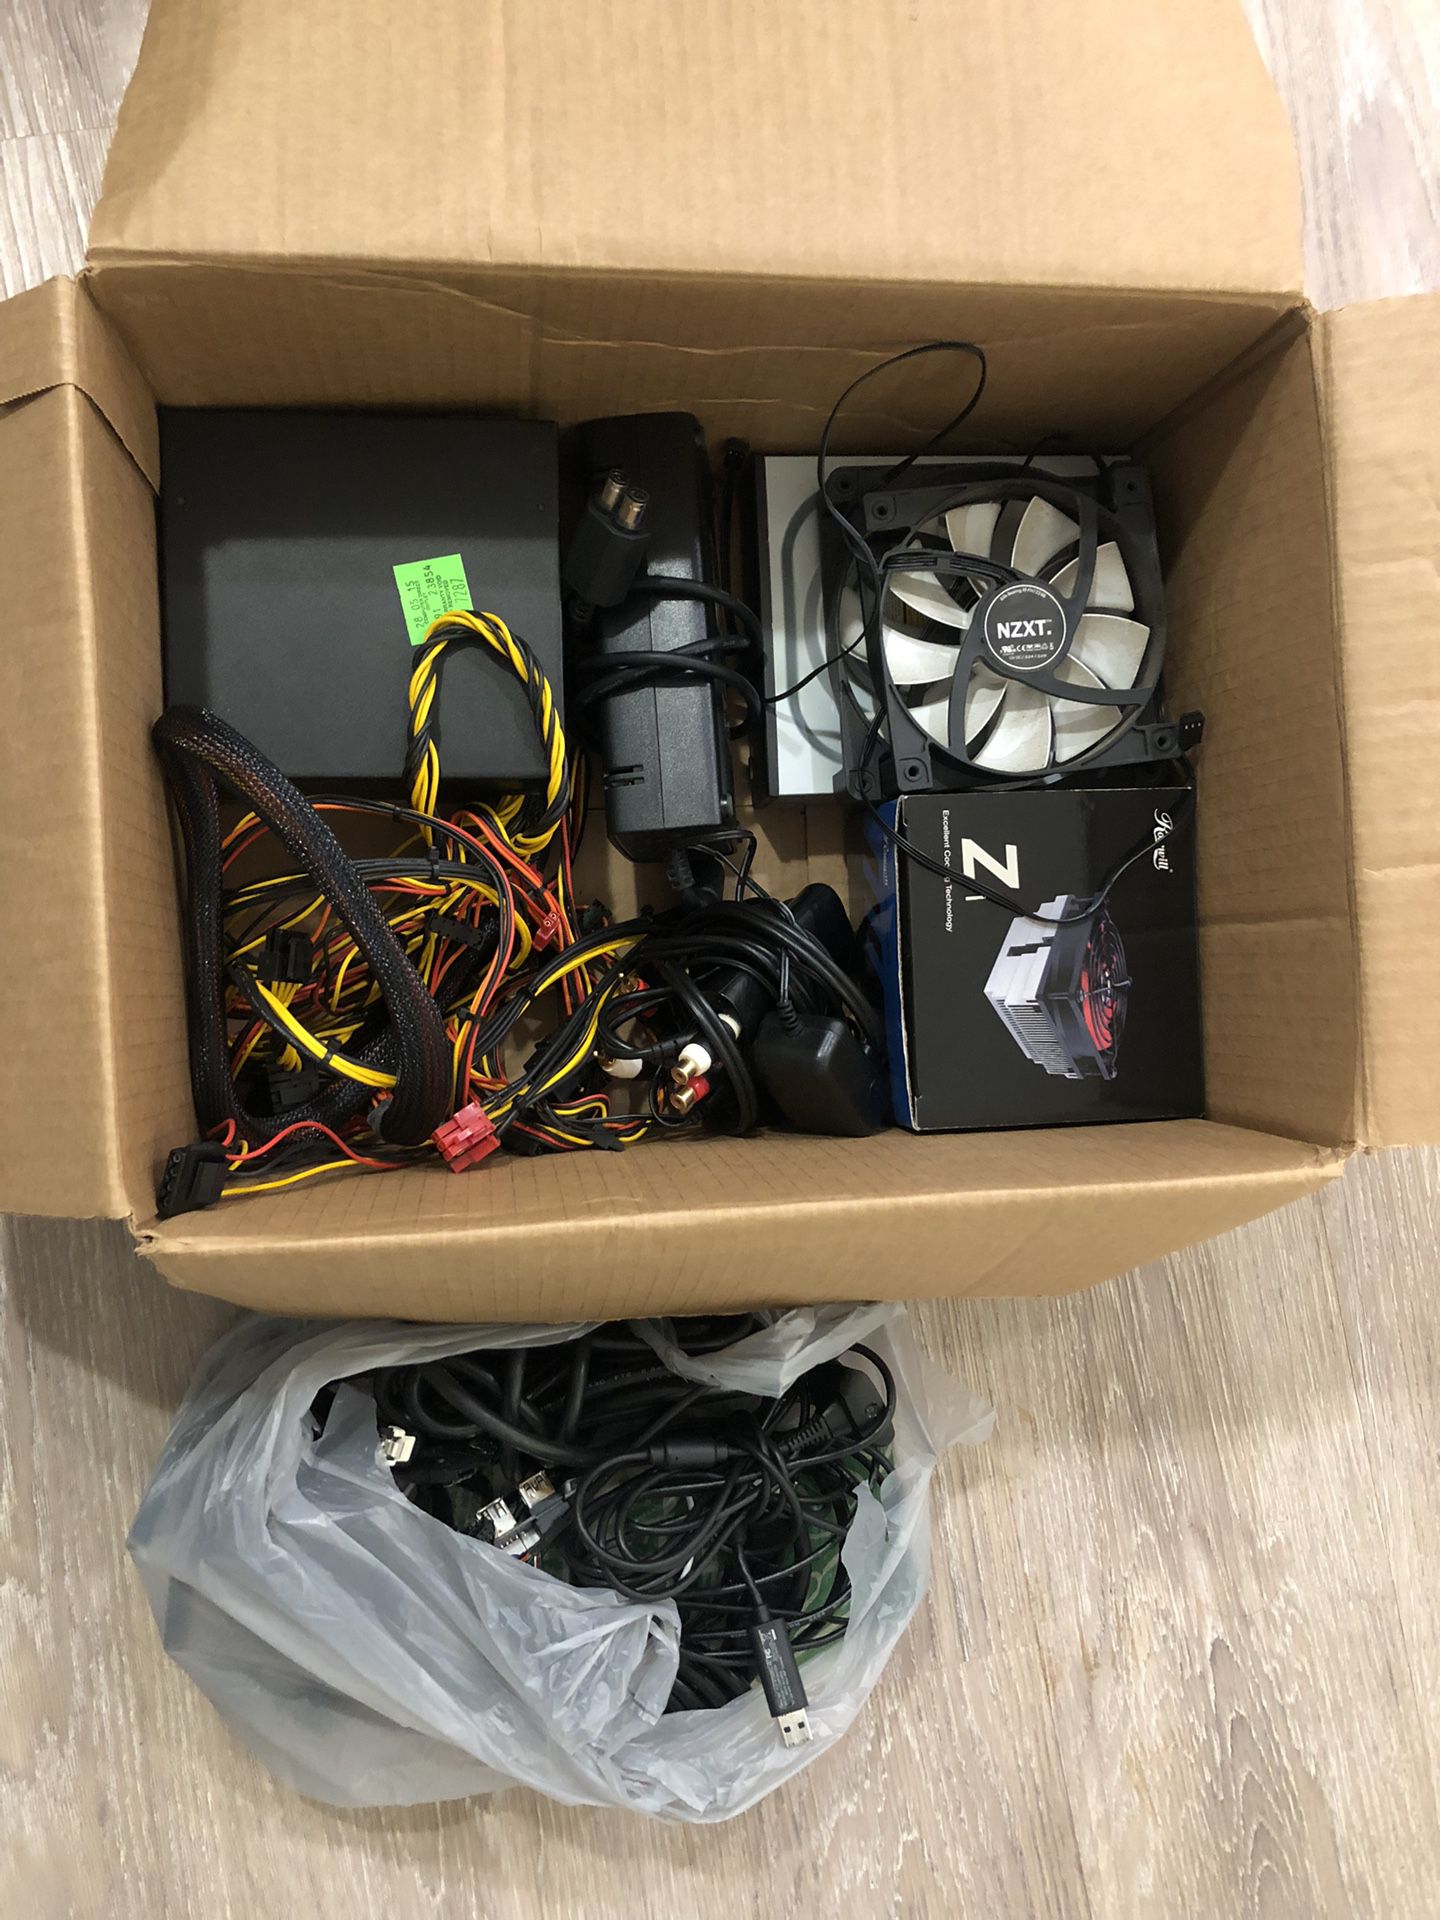 Parts For Computer power 700w Thermaltake